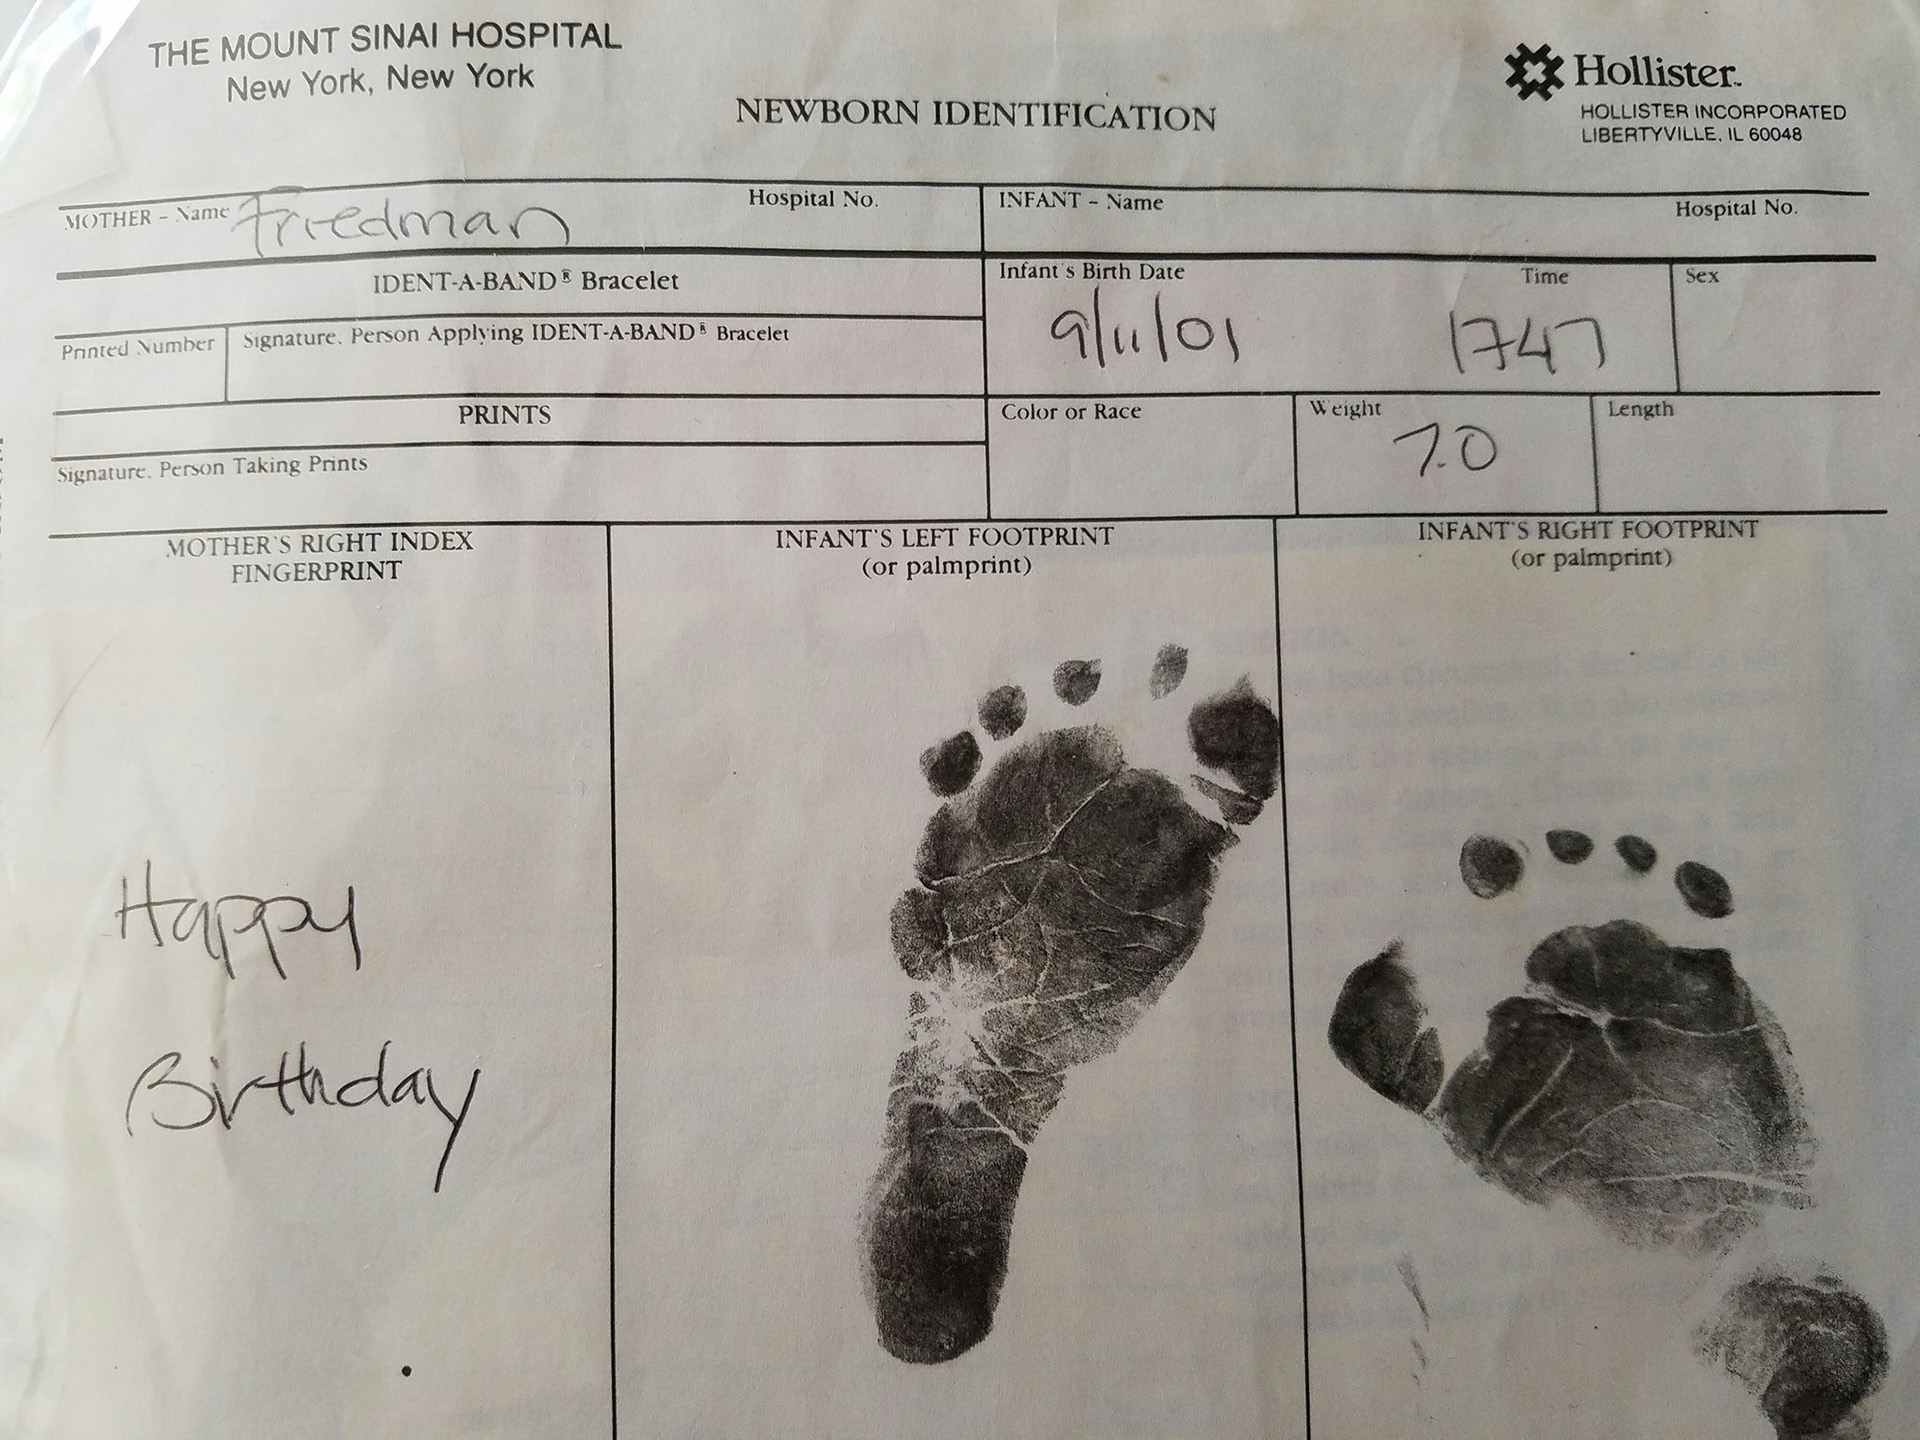 A newborn identification form from Mount Sinai hospital dated 9/11/01 with a baby's footprints and other identifying information.